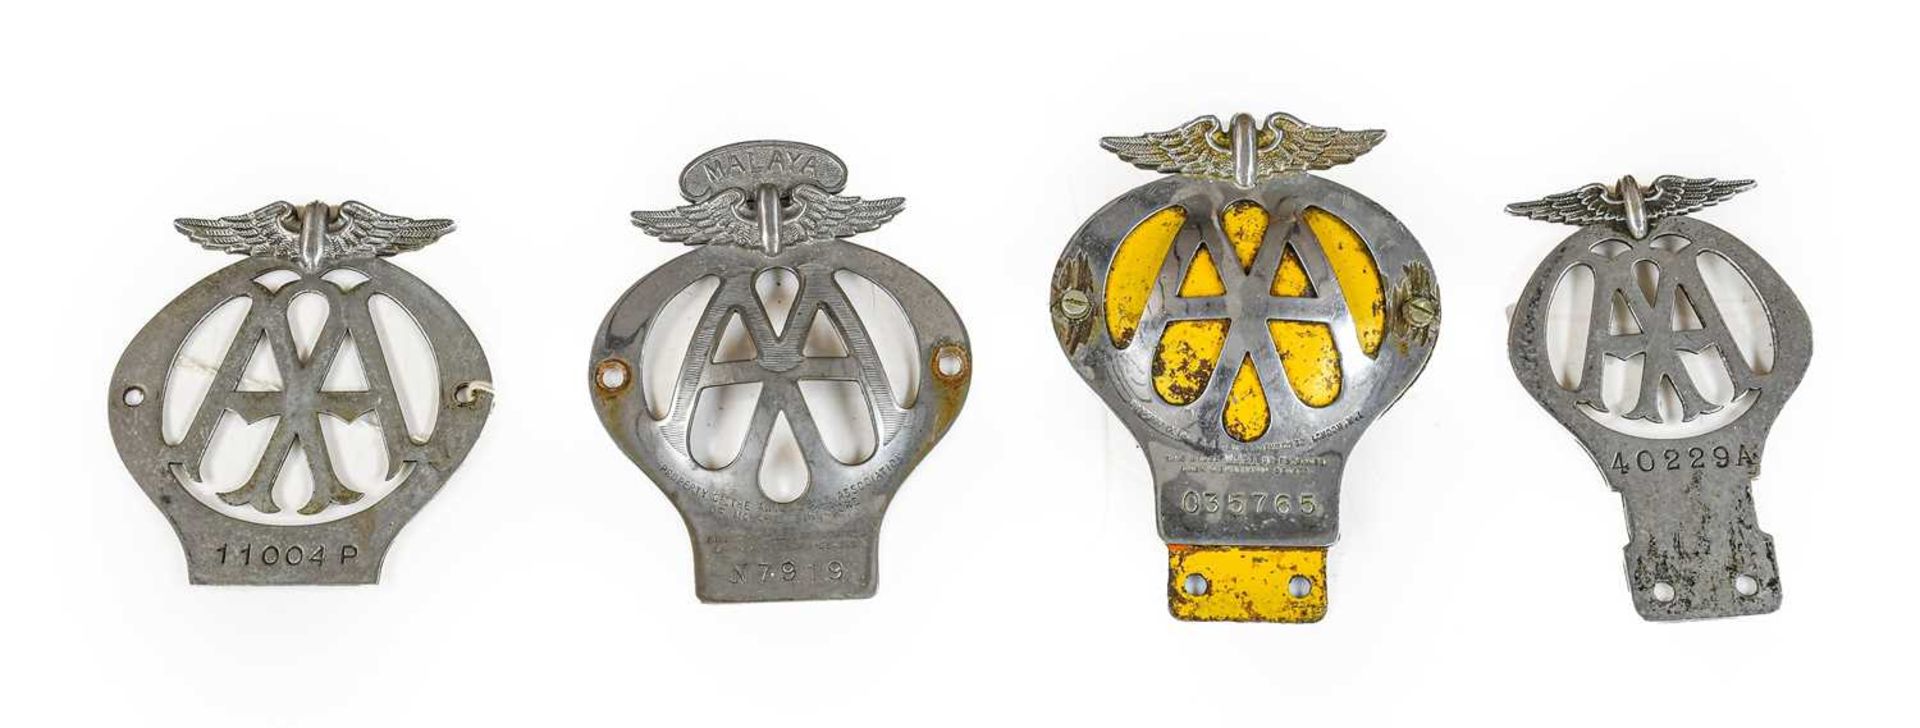 A Malaya AA Car Badge, numbered N7919; Two 1930’s AA Car Badges; and A Later Chromed Example (4)